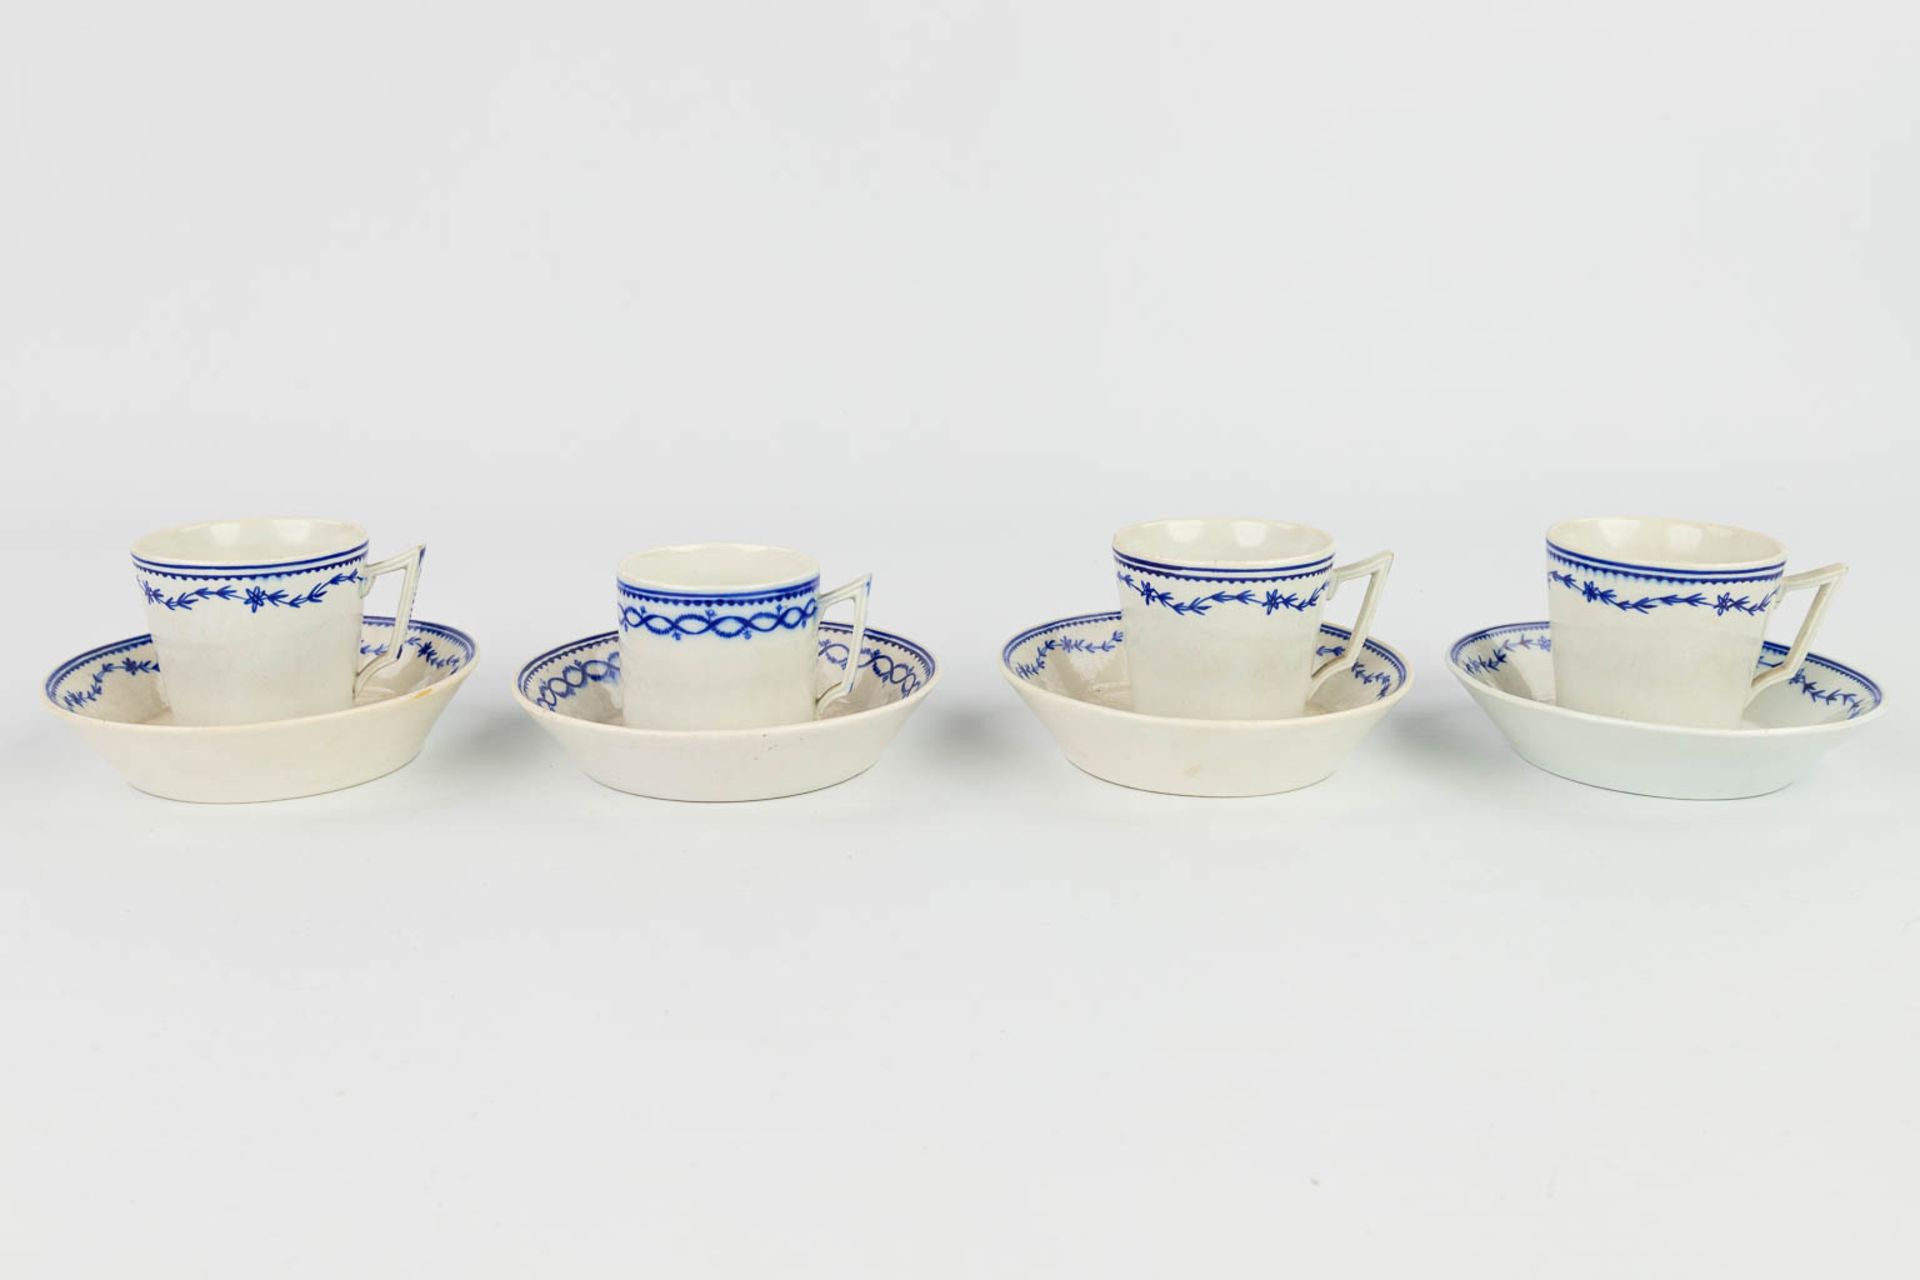 A collection of 3 plates, 4 cups and saucers made in Doornik. The first half of the 19th century. - Image 5 of 12